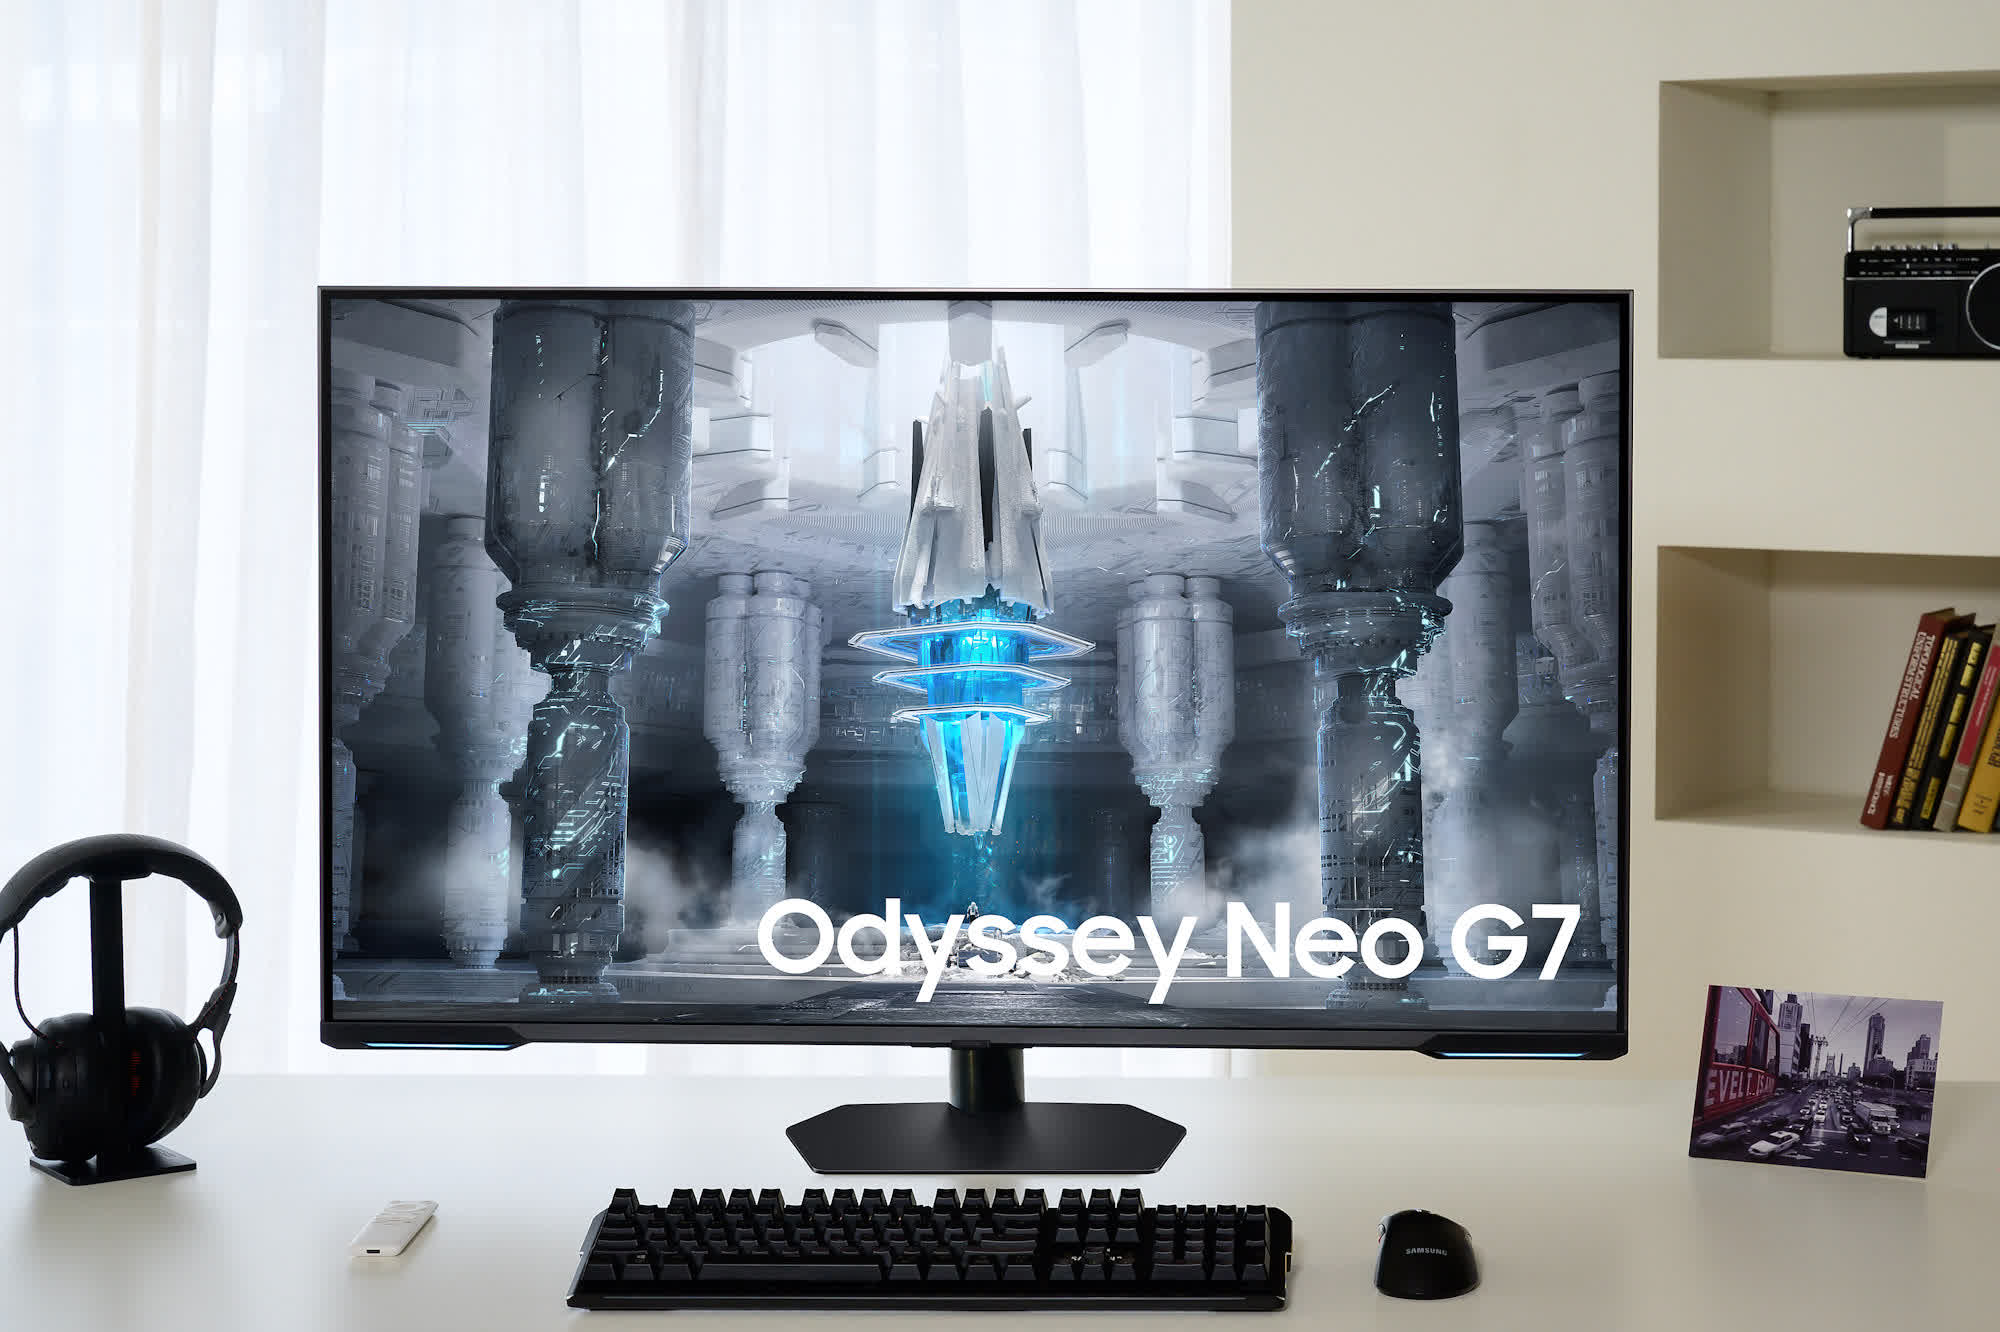 Samsung unveils the 43-inch Odyssey Neo G7, its first flat Mini-LED gaming monitor